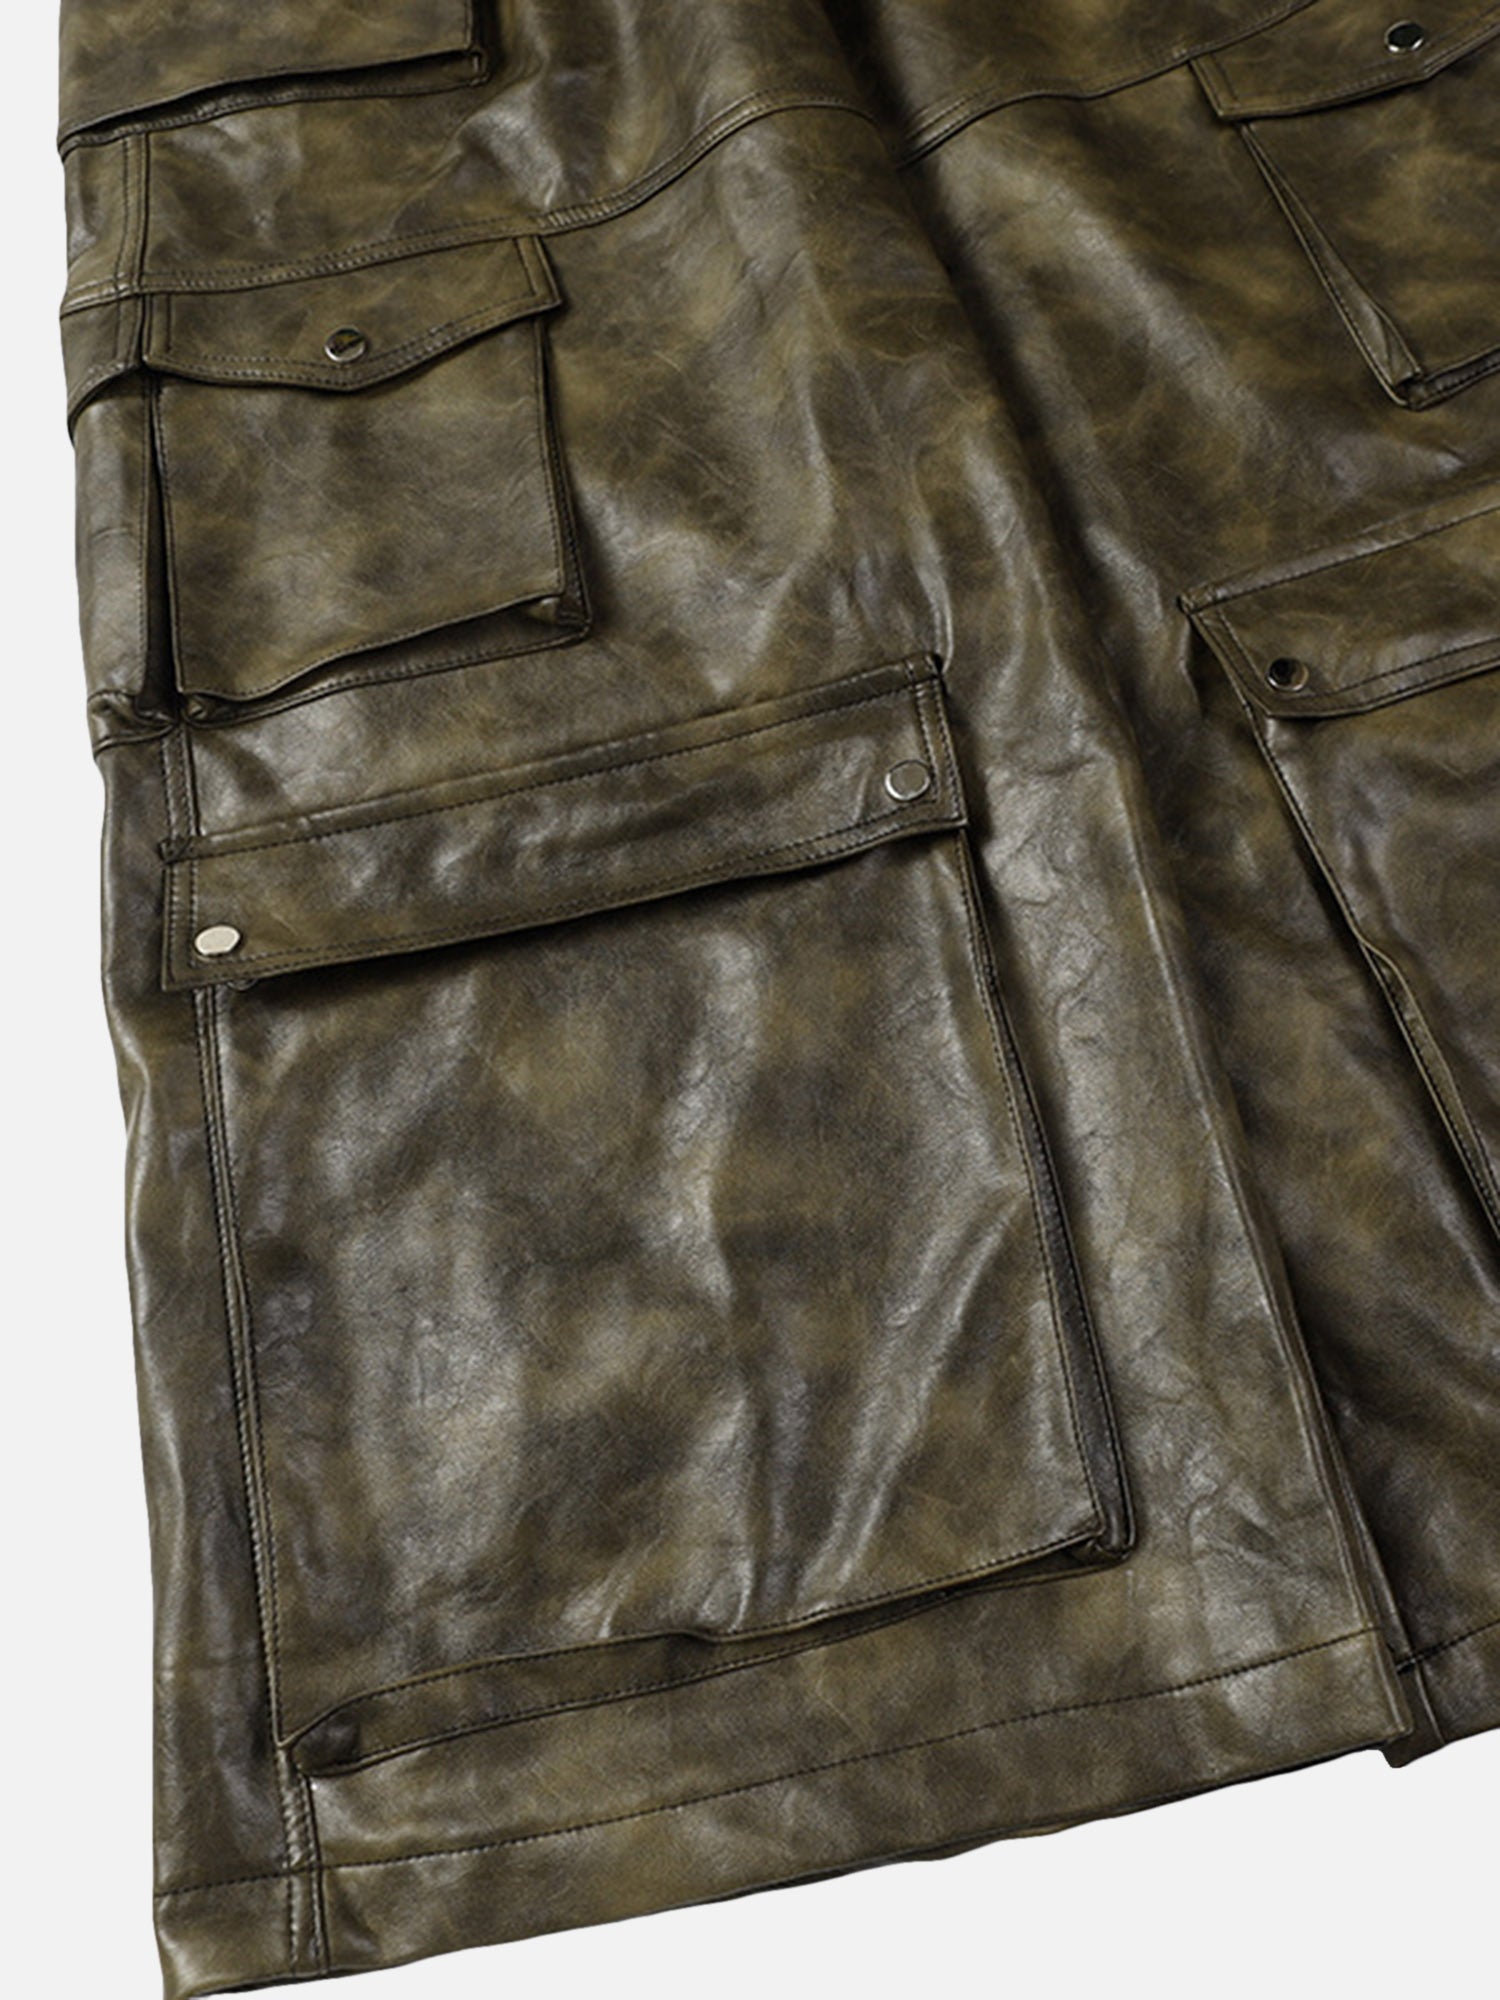 Thesupermade Hip-hop High Street Multi-pocket Leather Cargo Pants